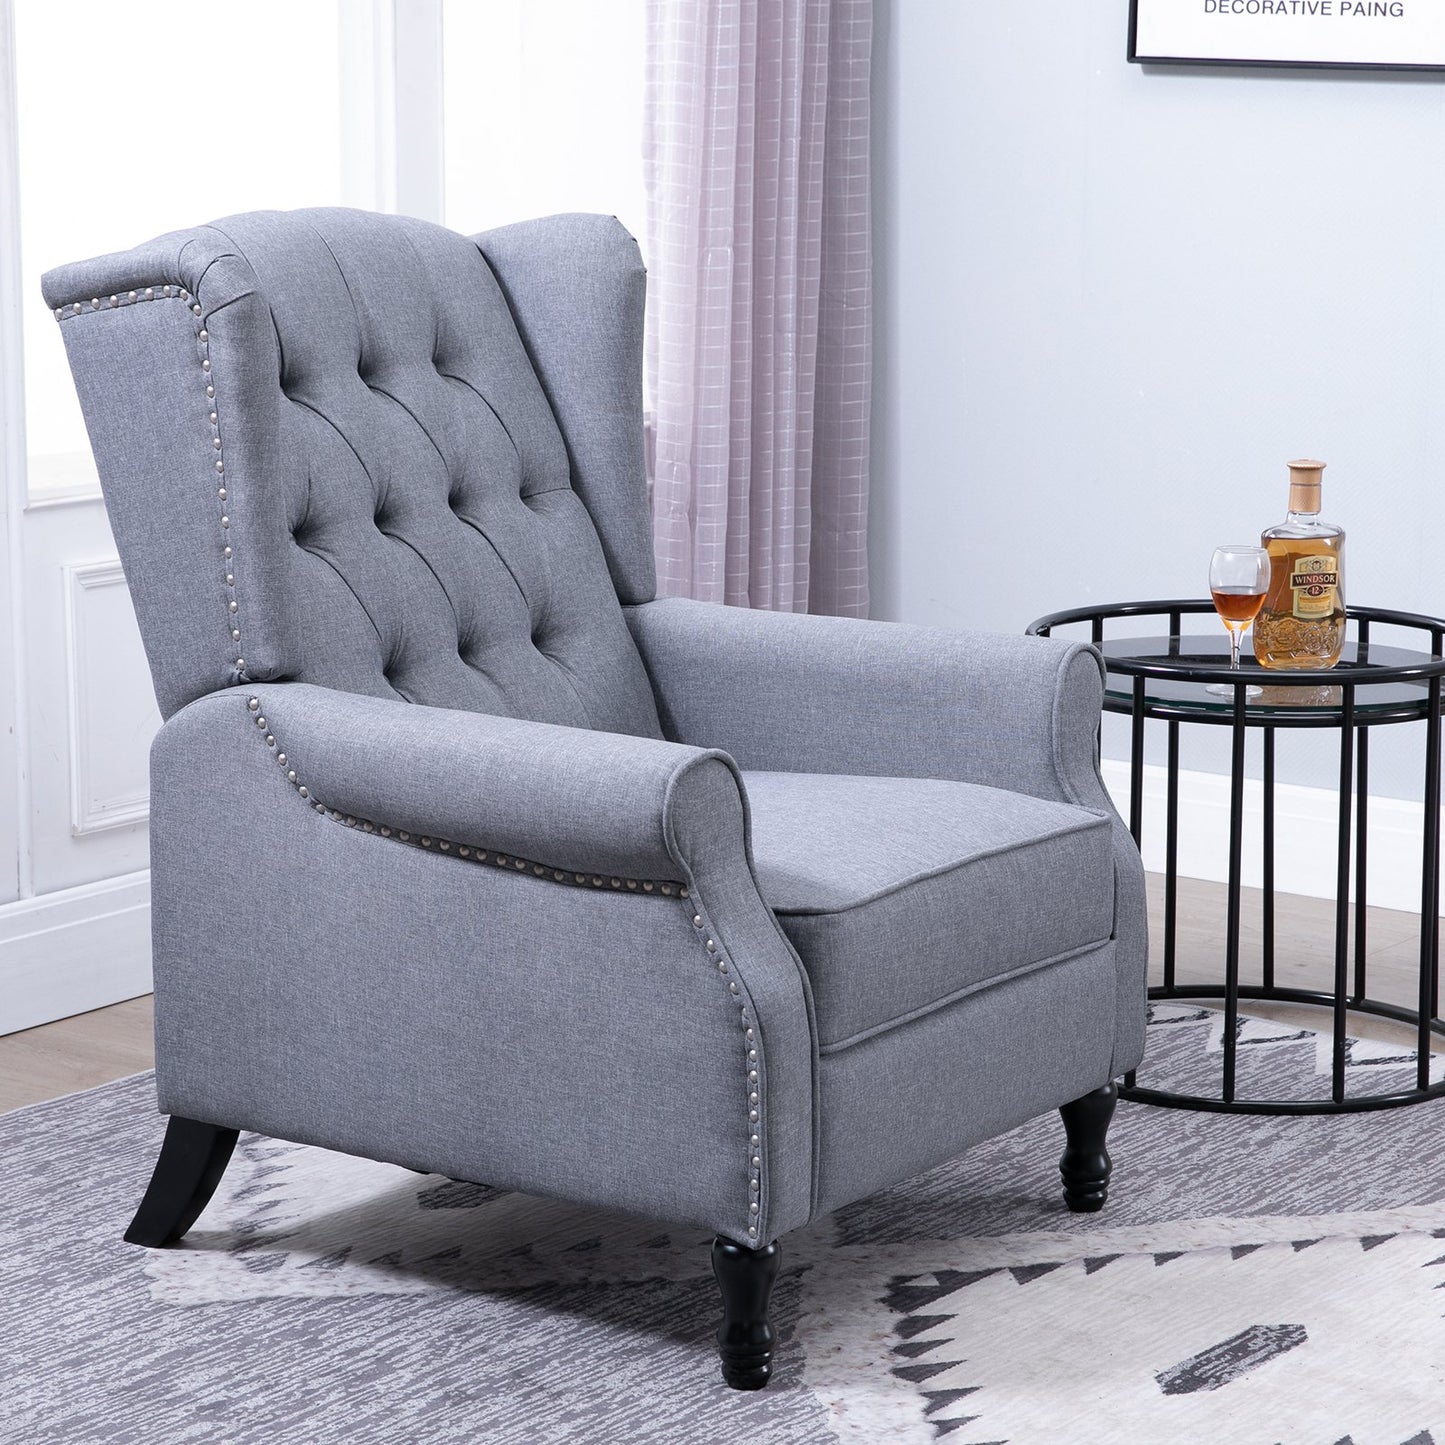 HOMCOM Reclining Wingback Armchair, with Footrest - Grey